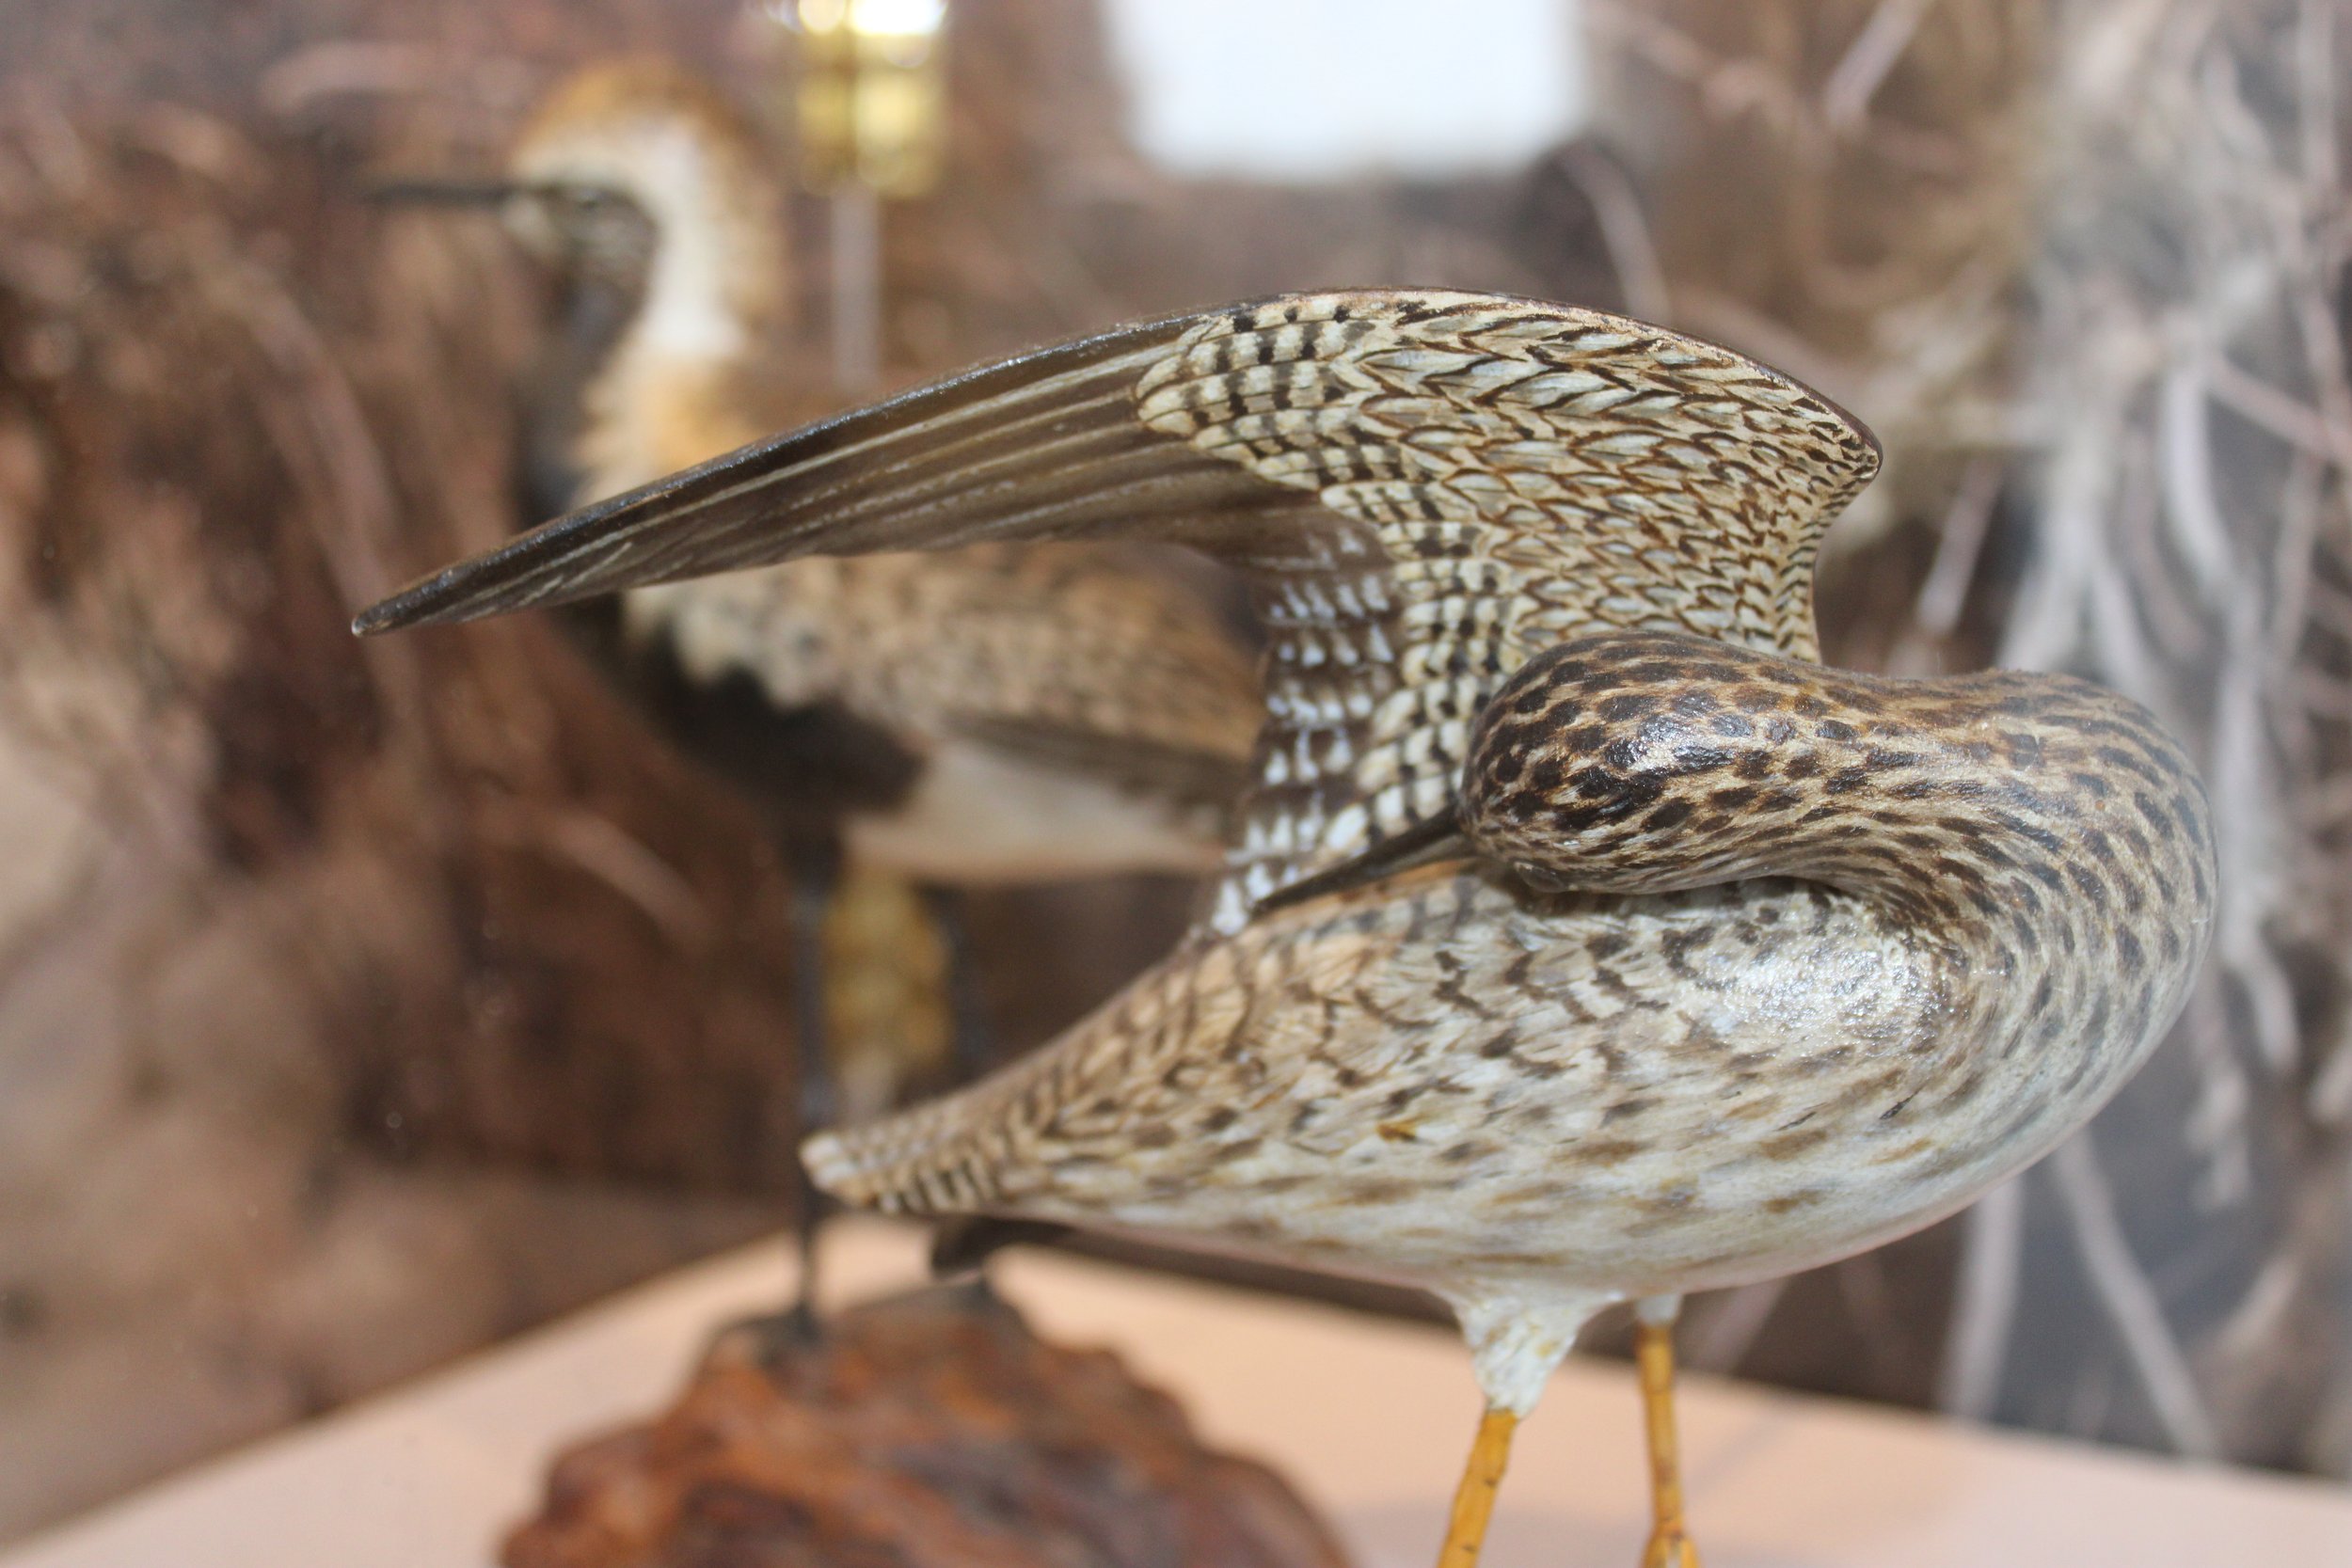  Every year, the Cape's sandy beaches are the temporary homes to thousands of migratory shorebirds. In this exhibit, learn about the different types of shorebirds that call the Cape home, the food they eat, and the incredible journeys they make to ge